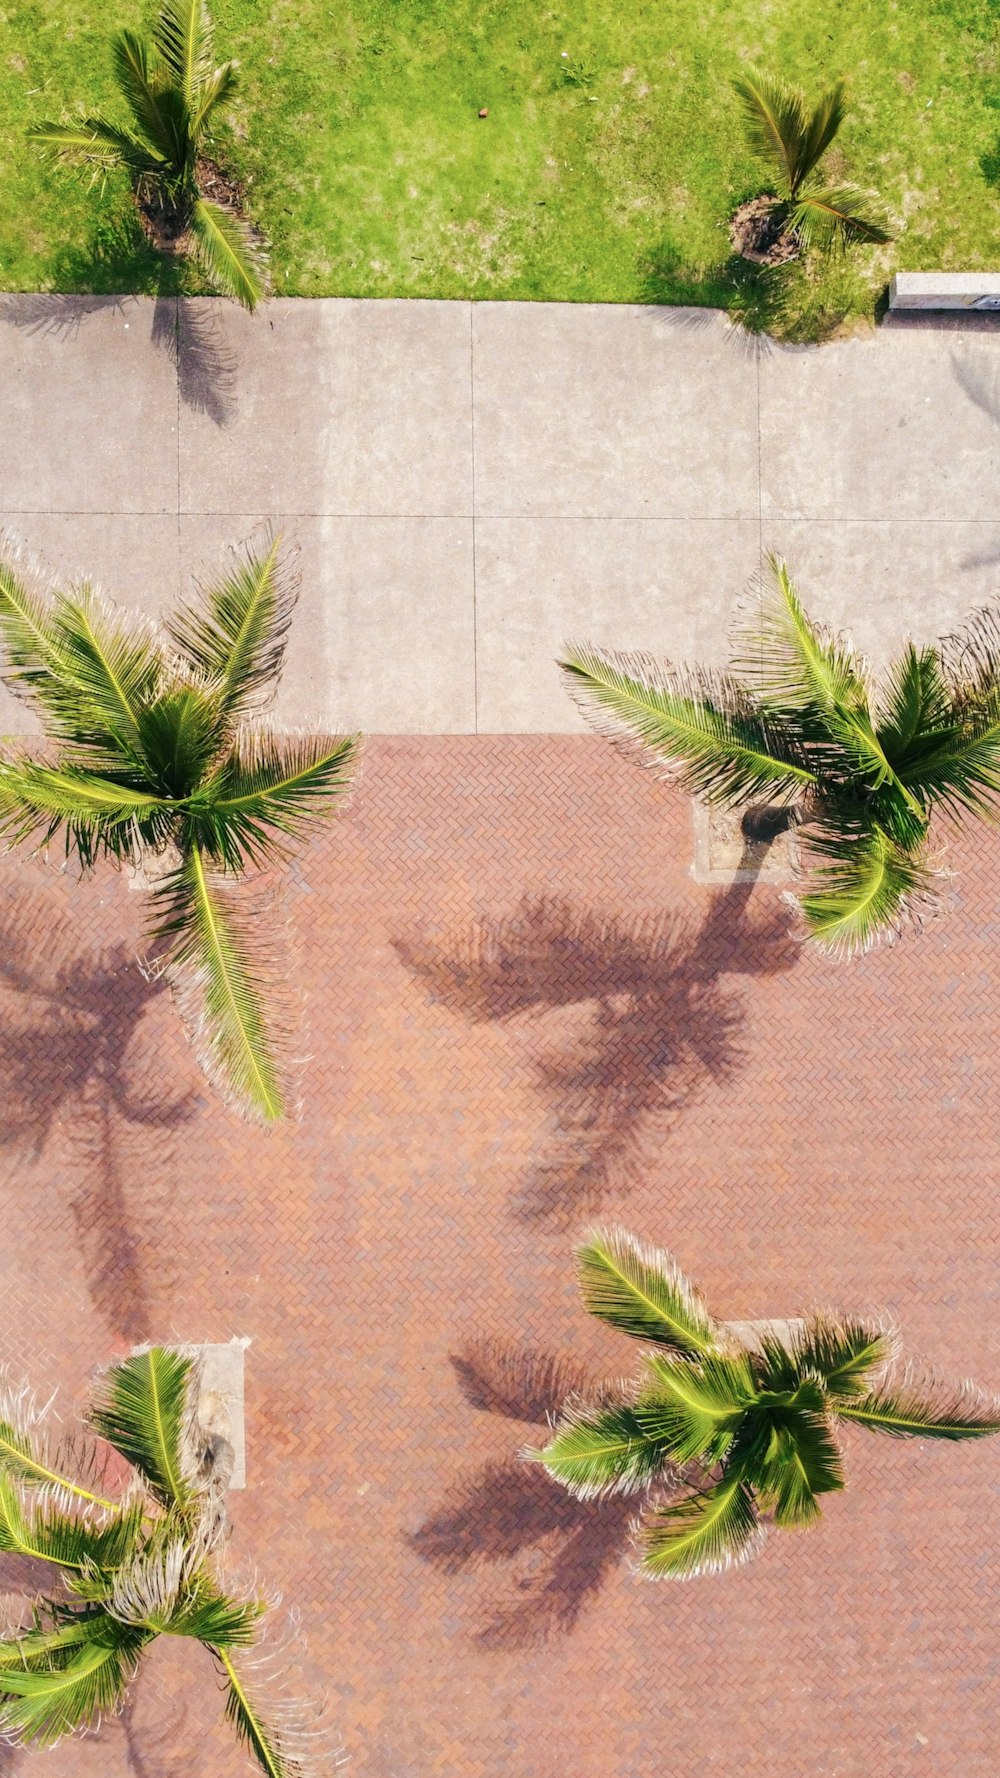 a group of palm trees next to a sidewalk